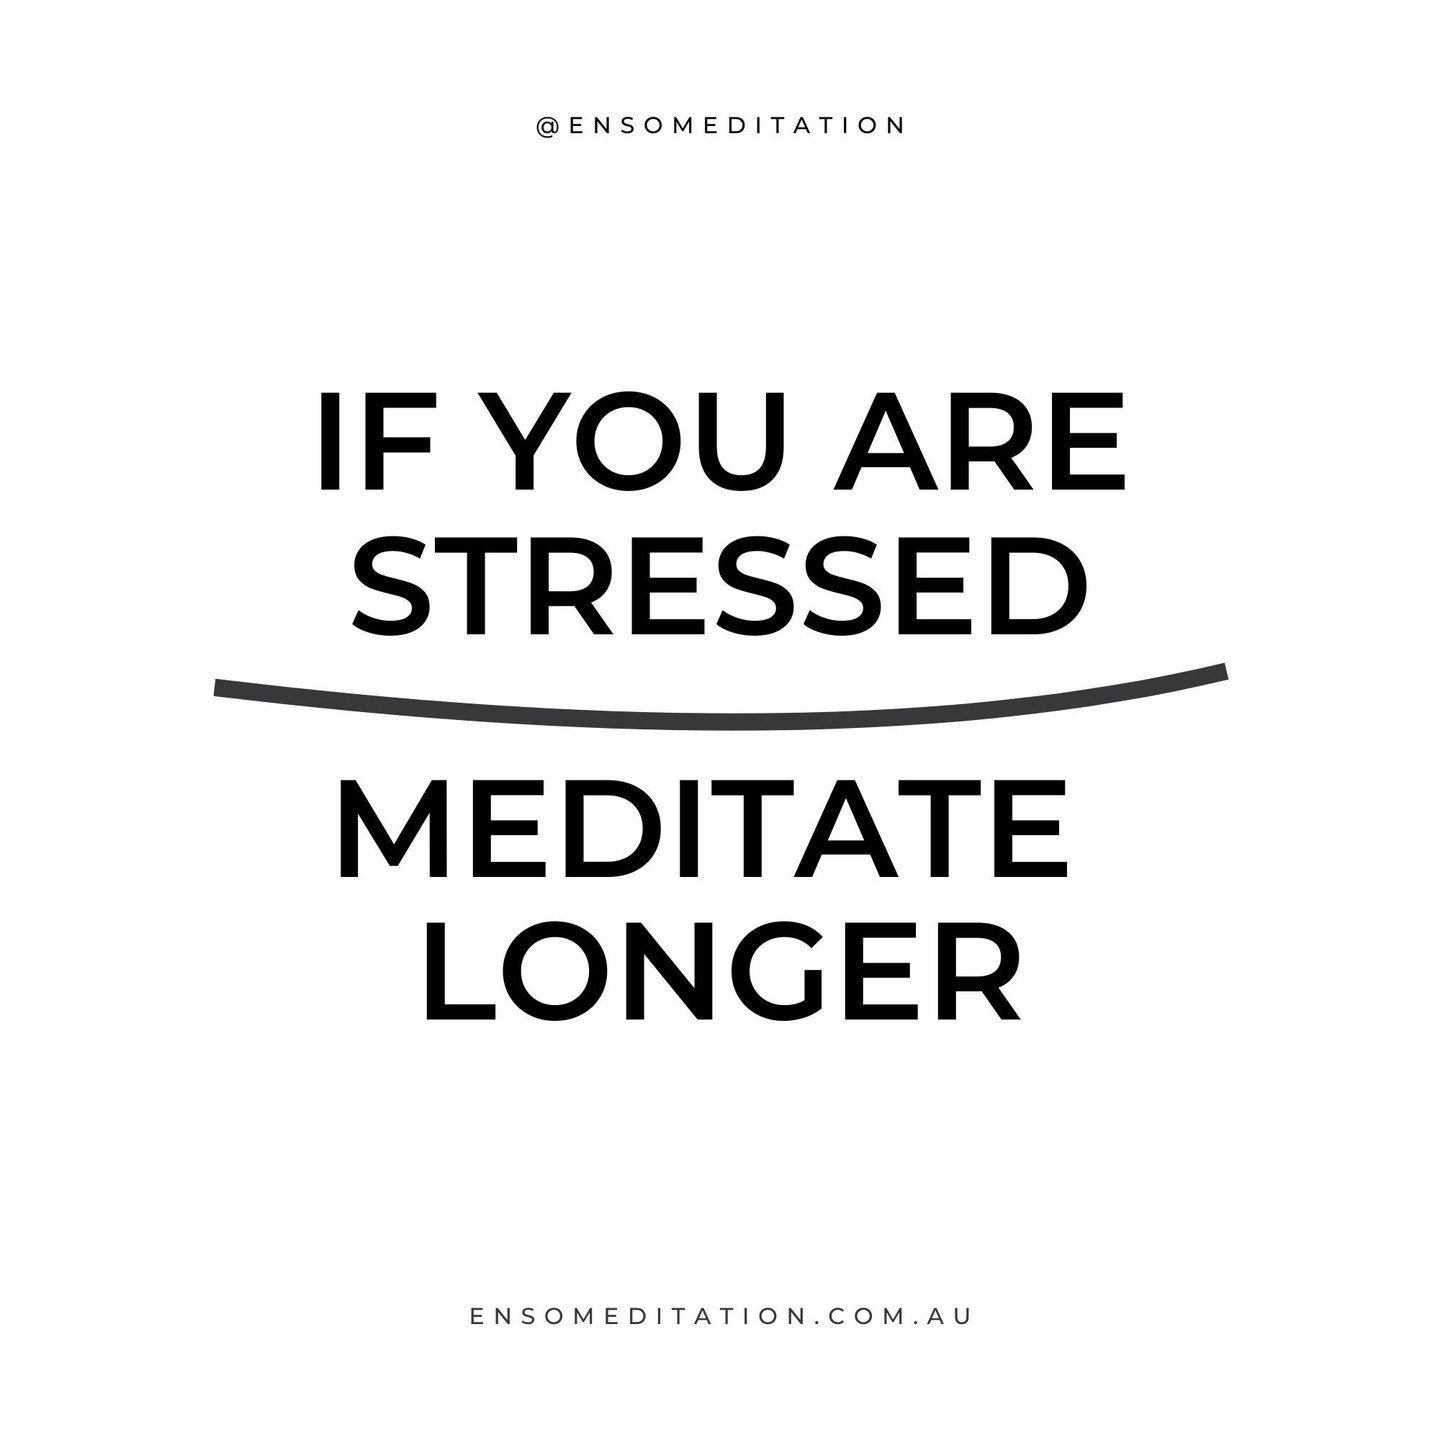 Feeling the pressure? Sometimes, a quick break isn&rsquo;t enough to shake off that stress. If you&rsquo;re really feeling it, consider this a nudge to meditate a bit longer. 🧘&zwj;♂️

Think of it as investing in your peace of mind. The more time yo